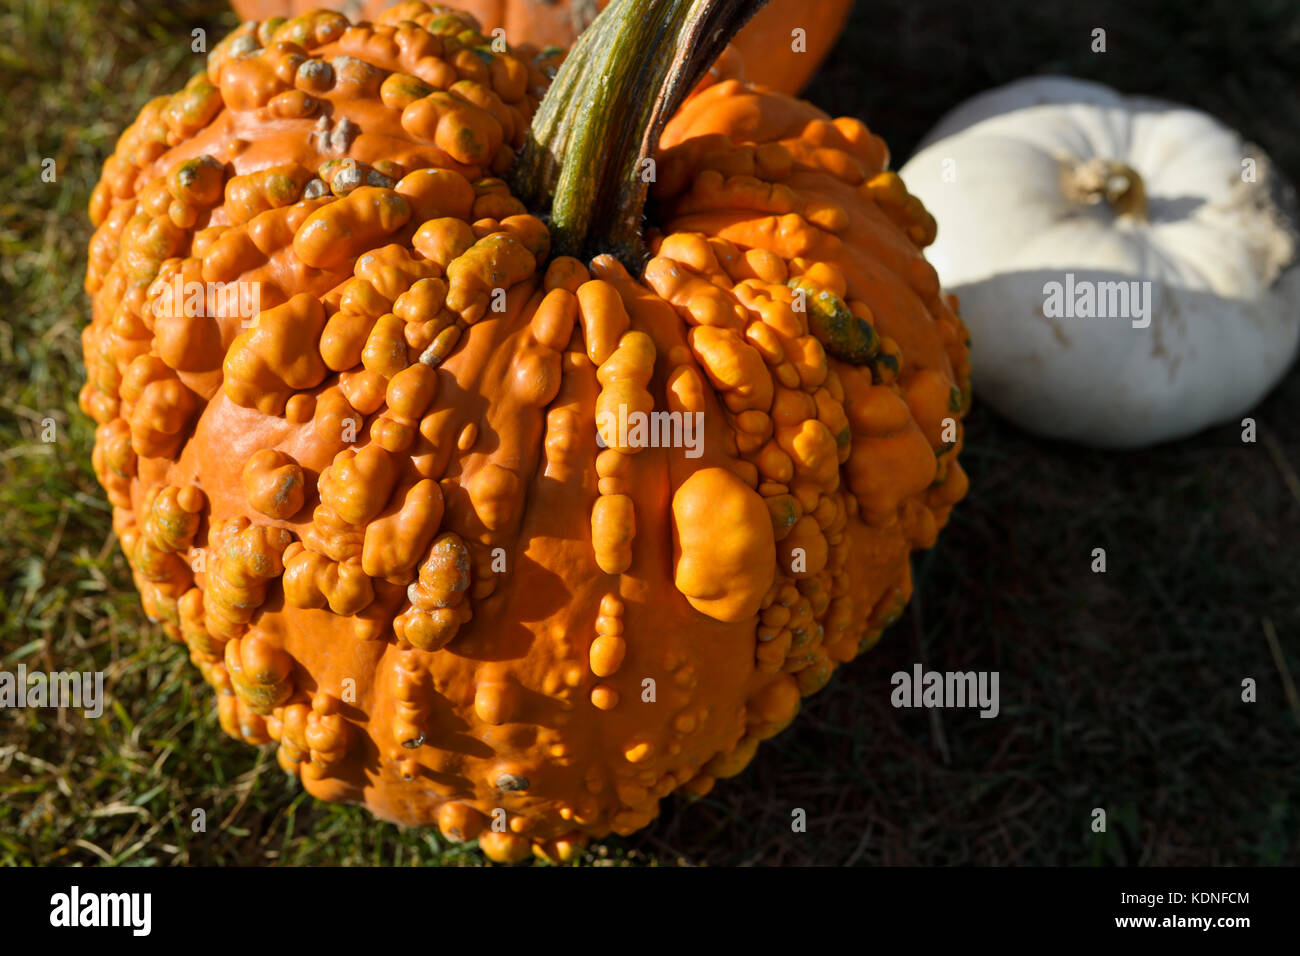 Pimply orange pumpkin covered in bumps and white squash in outdoor market Prince Edward County at Fall harvest Stock Photo